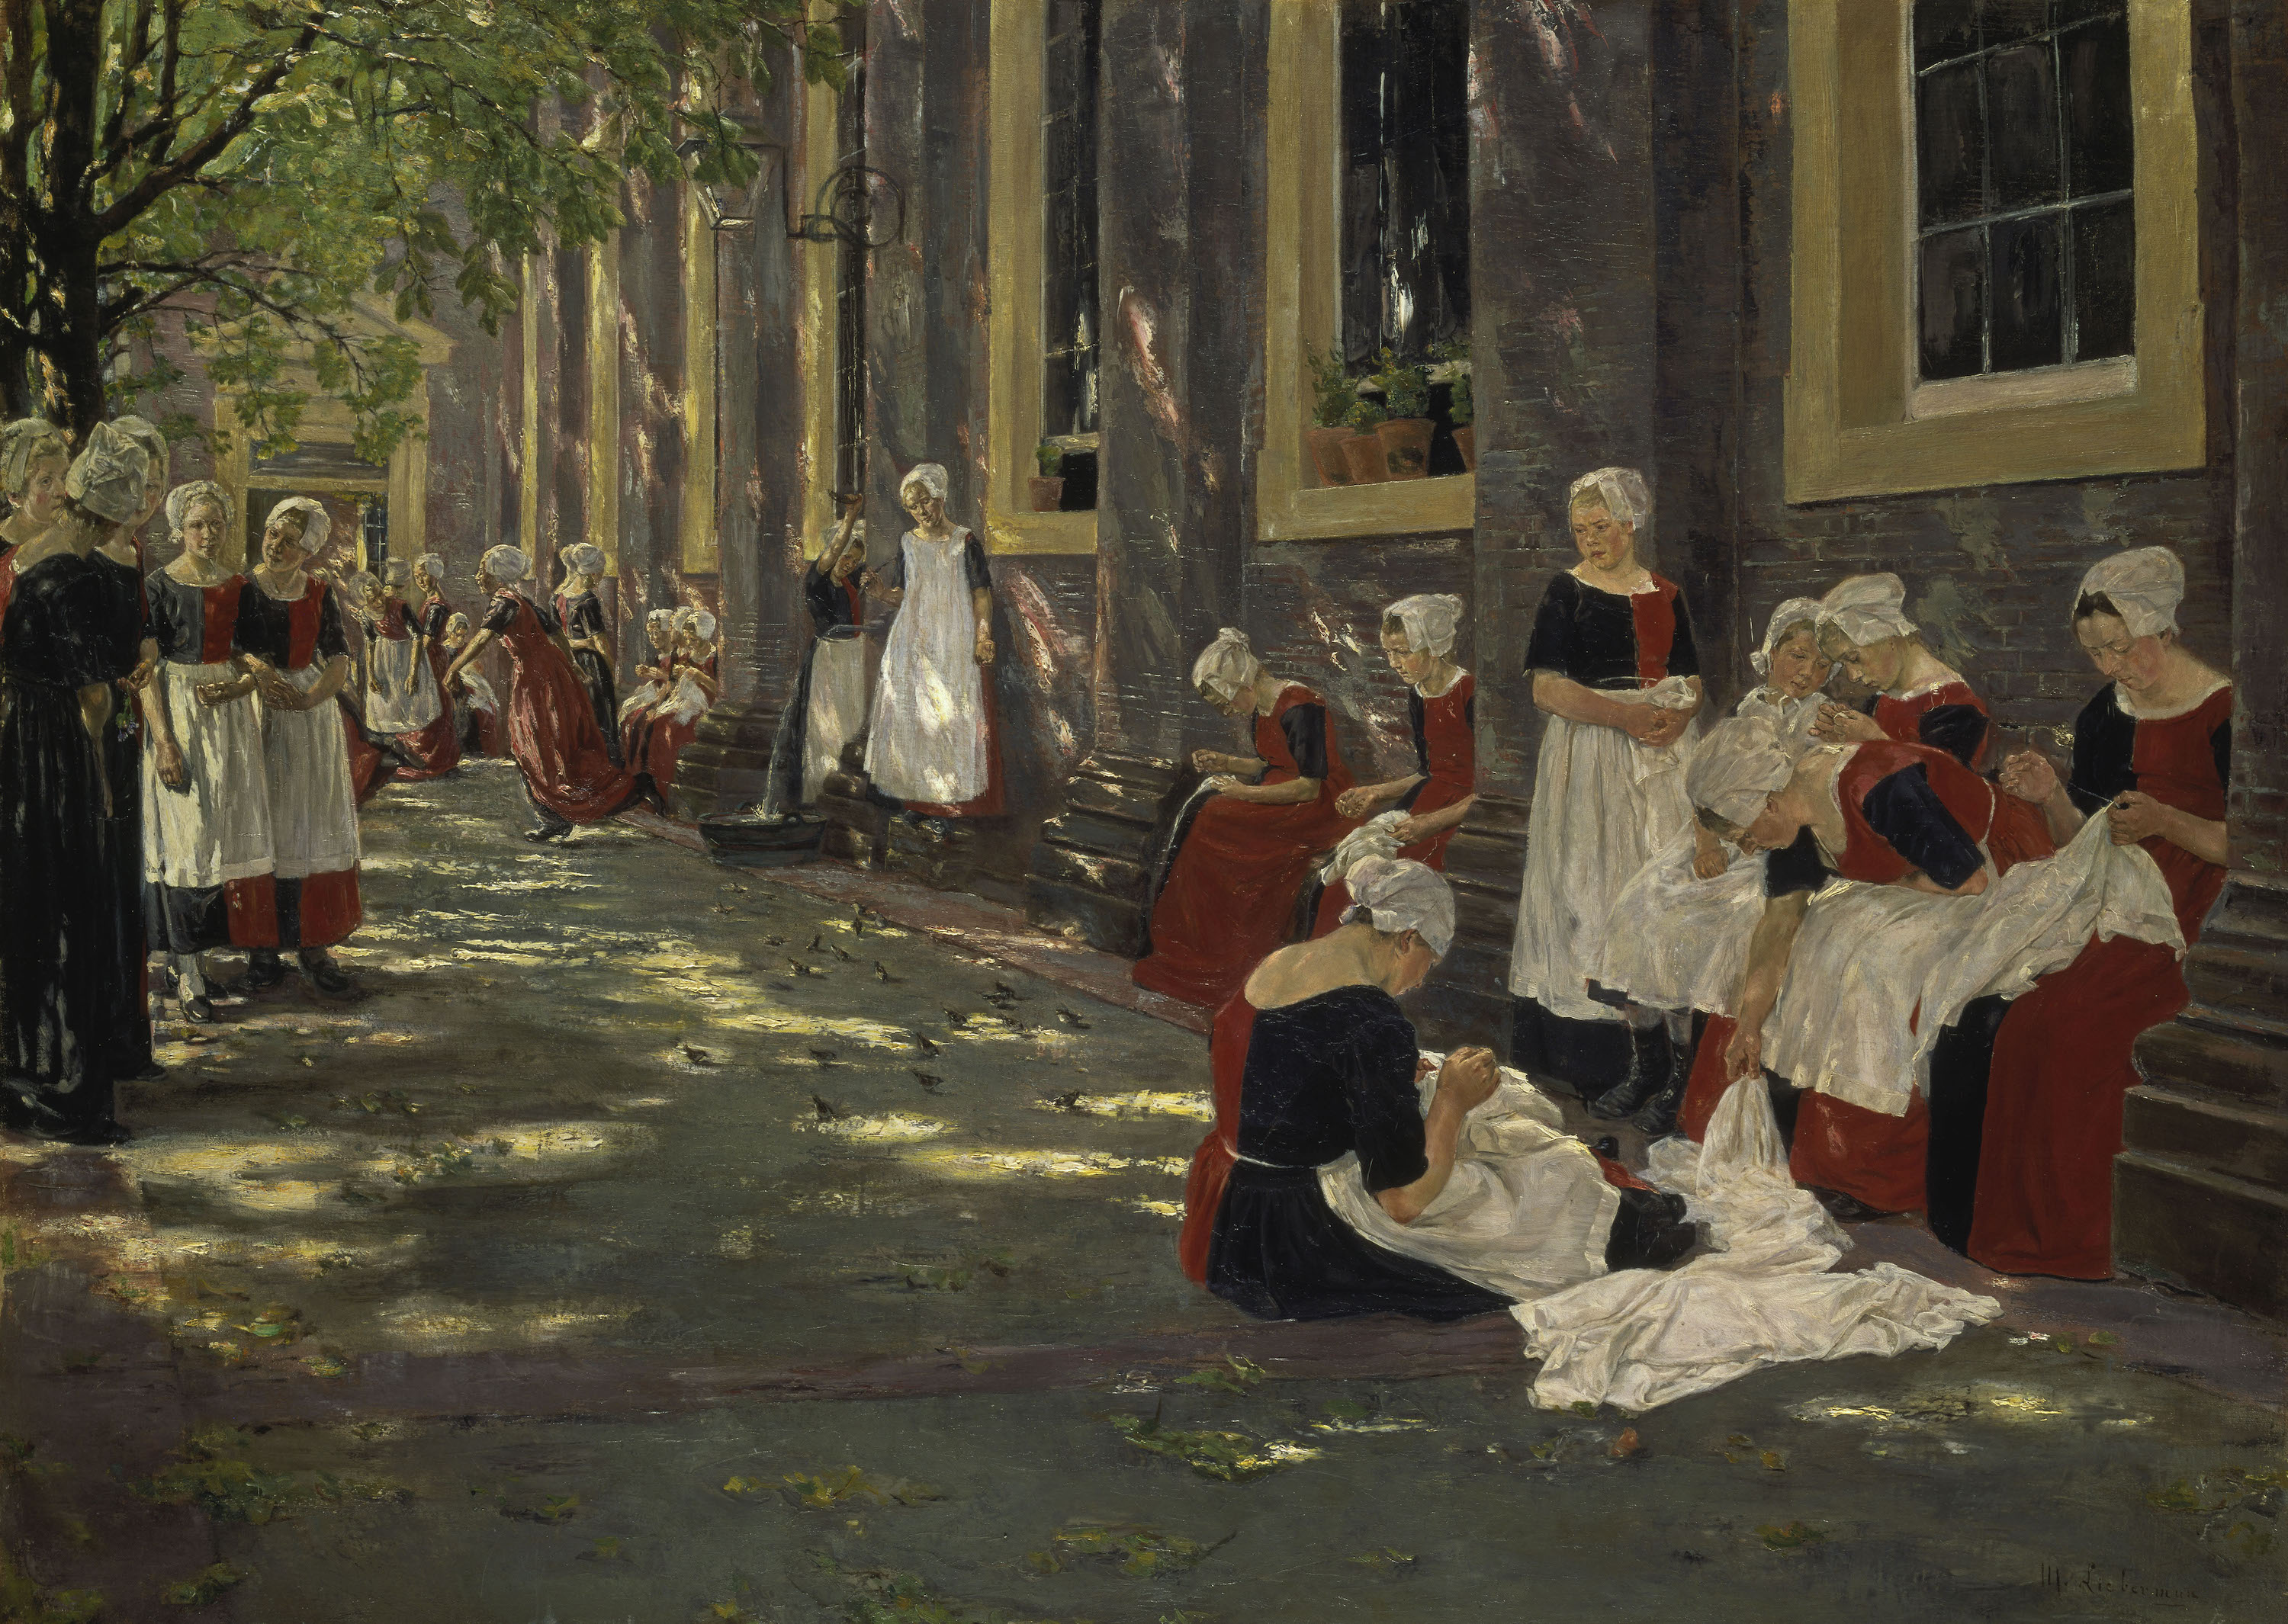 The Courtyard of the Orphanage in Amsterdam: Free Period in the Amsterdam Orphanage by Max Liebermann - 1881 – 1882 - 78.5 x 107.5 cm Städel Museum